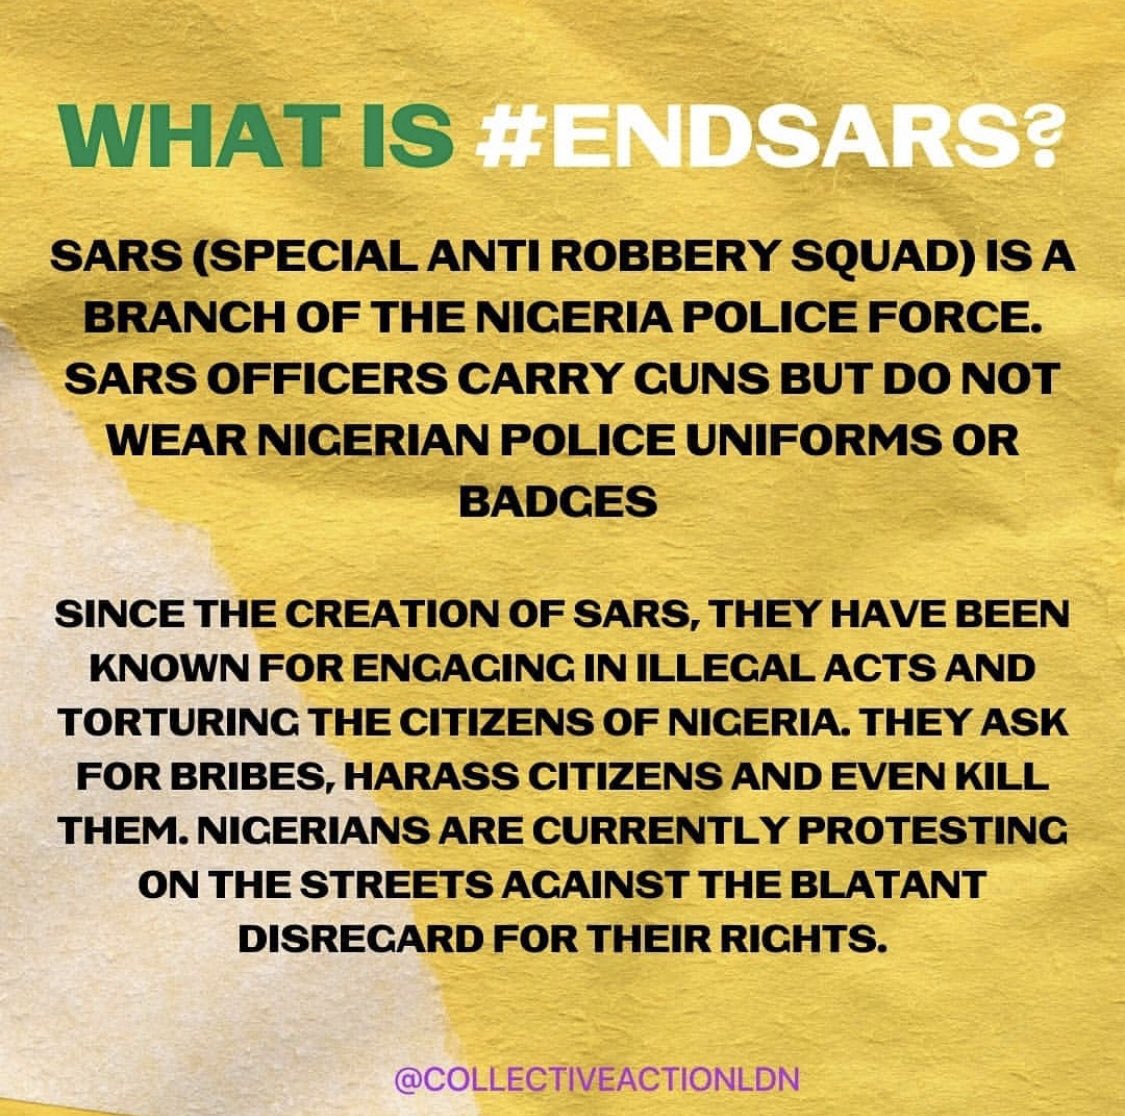 We’ve put together some info on  #EndSARS   and how you can meaningfully help from outside Nigeria. Check the link in our bio, or the thread below, for ways to support.  #EndSWAT  #LekkiMassacre